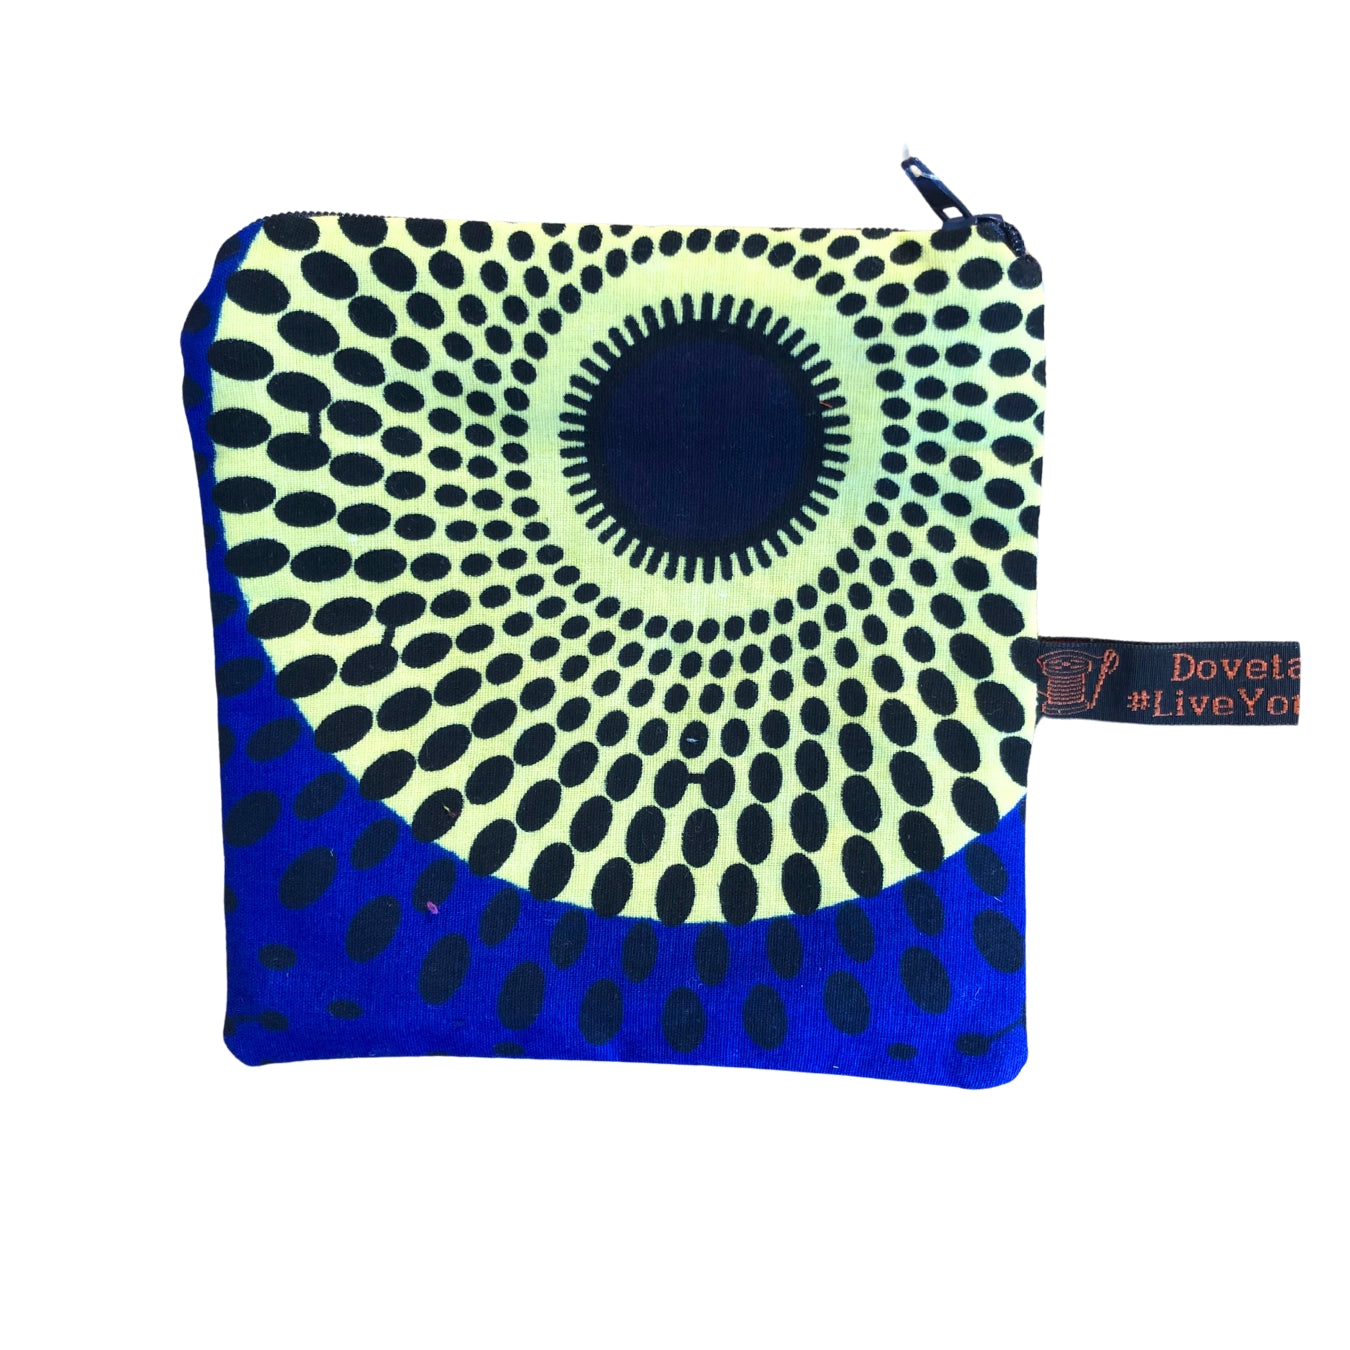 A blue and yellow pouch with a black circle on a white plain background.